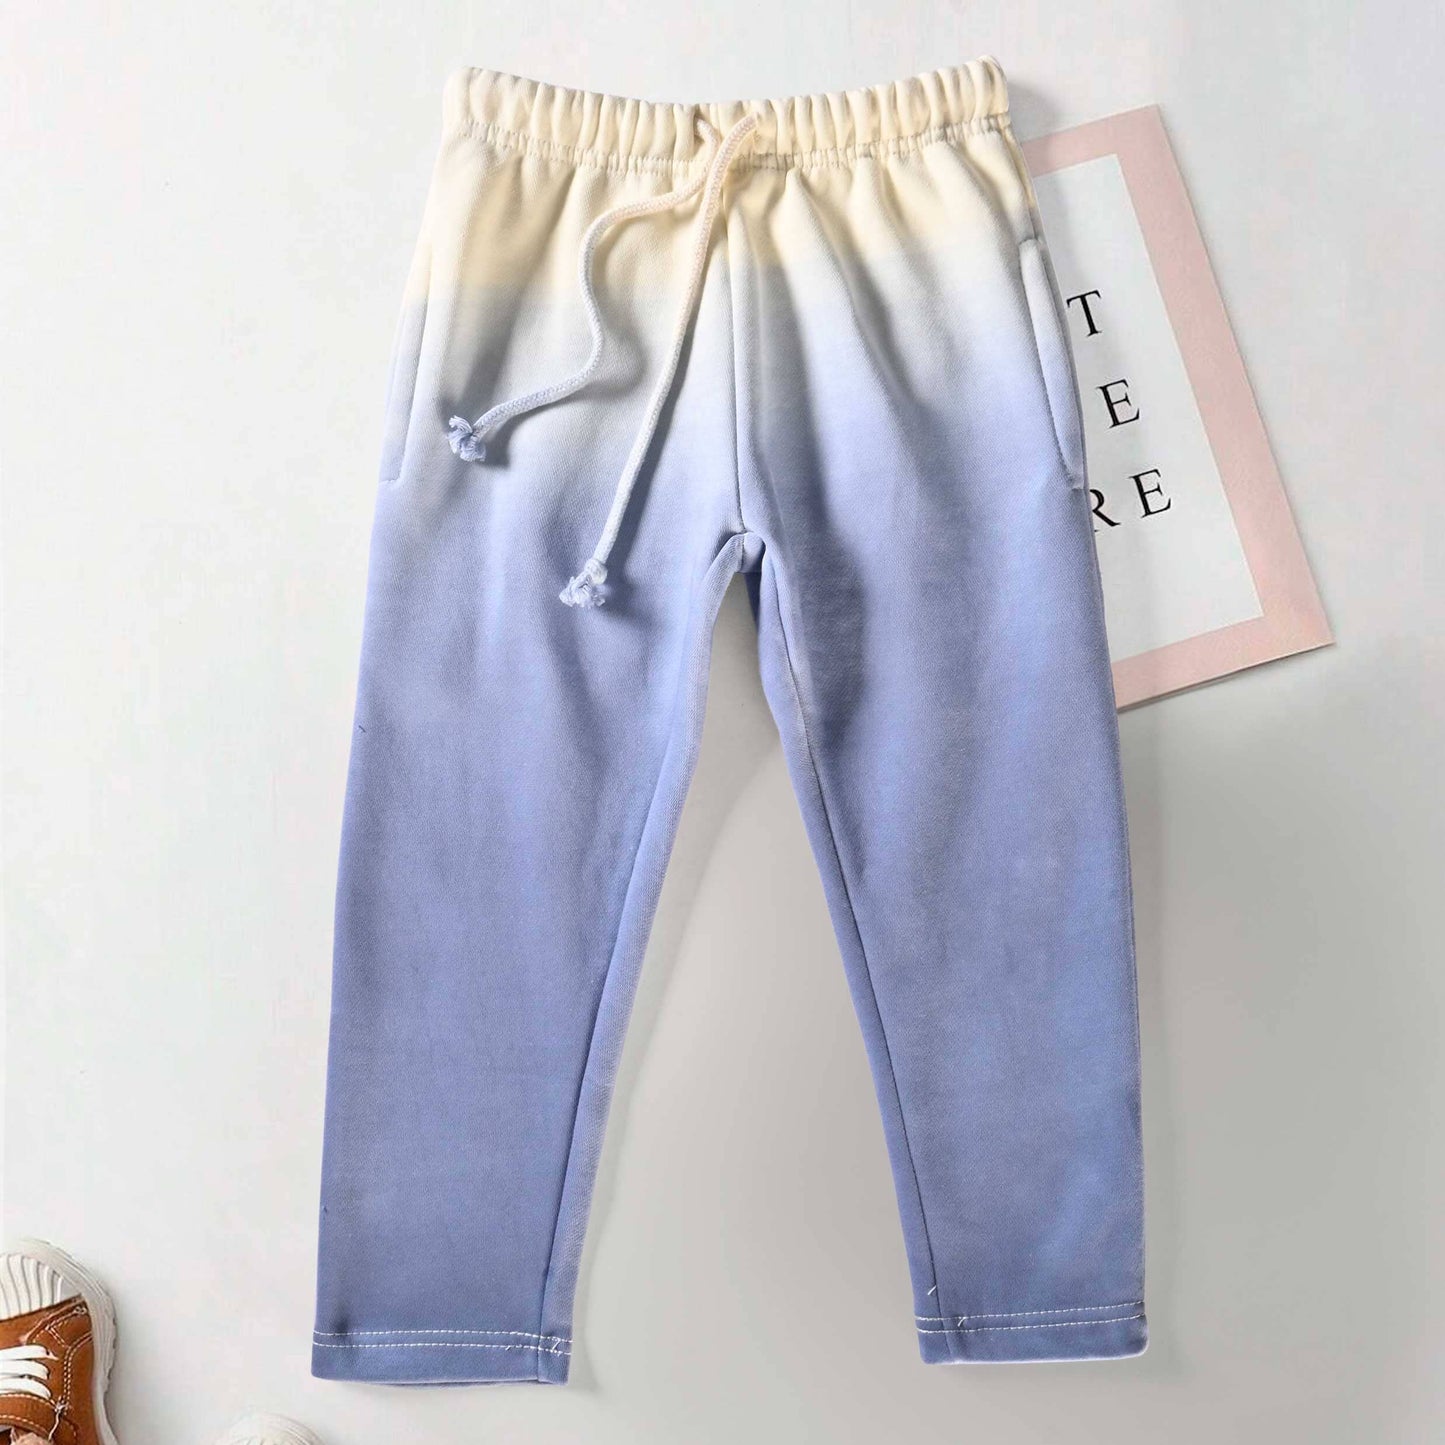 Max 21 Kid's Tie And Dye Style Santos Fleece Trousers Boy's Trousers SZK White & Blue 3-4 Years 